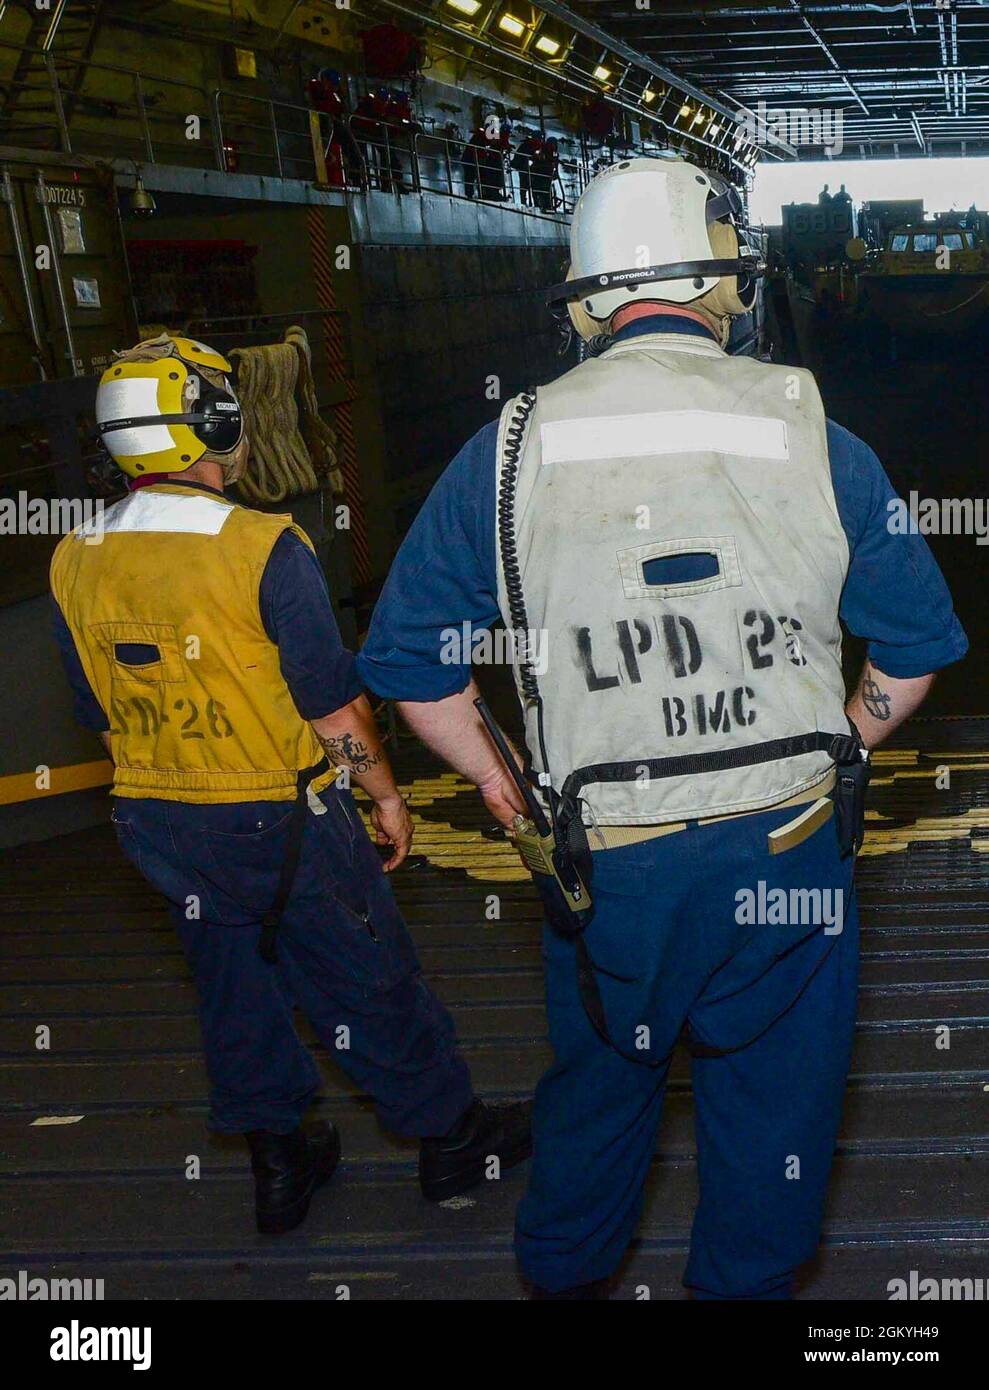 210729-N-MT581-1027    PACIFIC OCEAN (July 29, 2021) Sailors assigned to amphibious transport dock ship USS John P. Murtha (LPD 26) prepare to launch a Landing Craft, Utility (LCU) attached to Assault Craft Unit (ACU) 1, July 29. John P. Murtha is underway conducting routine operations as part of U.S. 3rd Fleet. Stock Photo